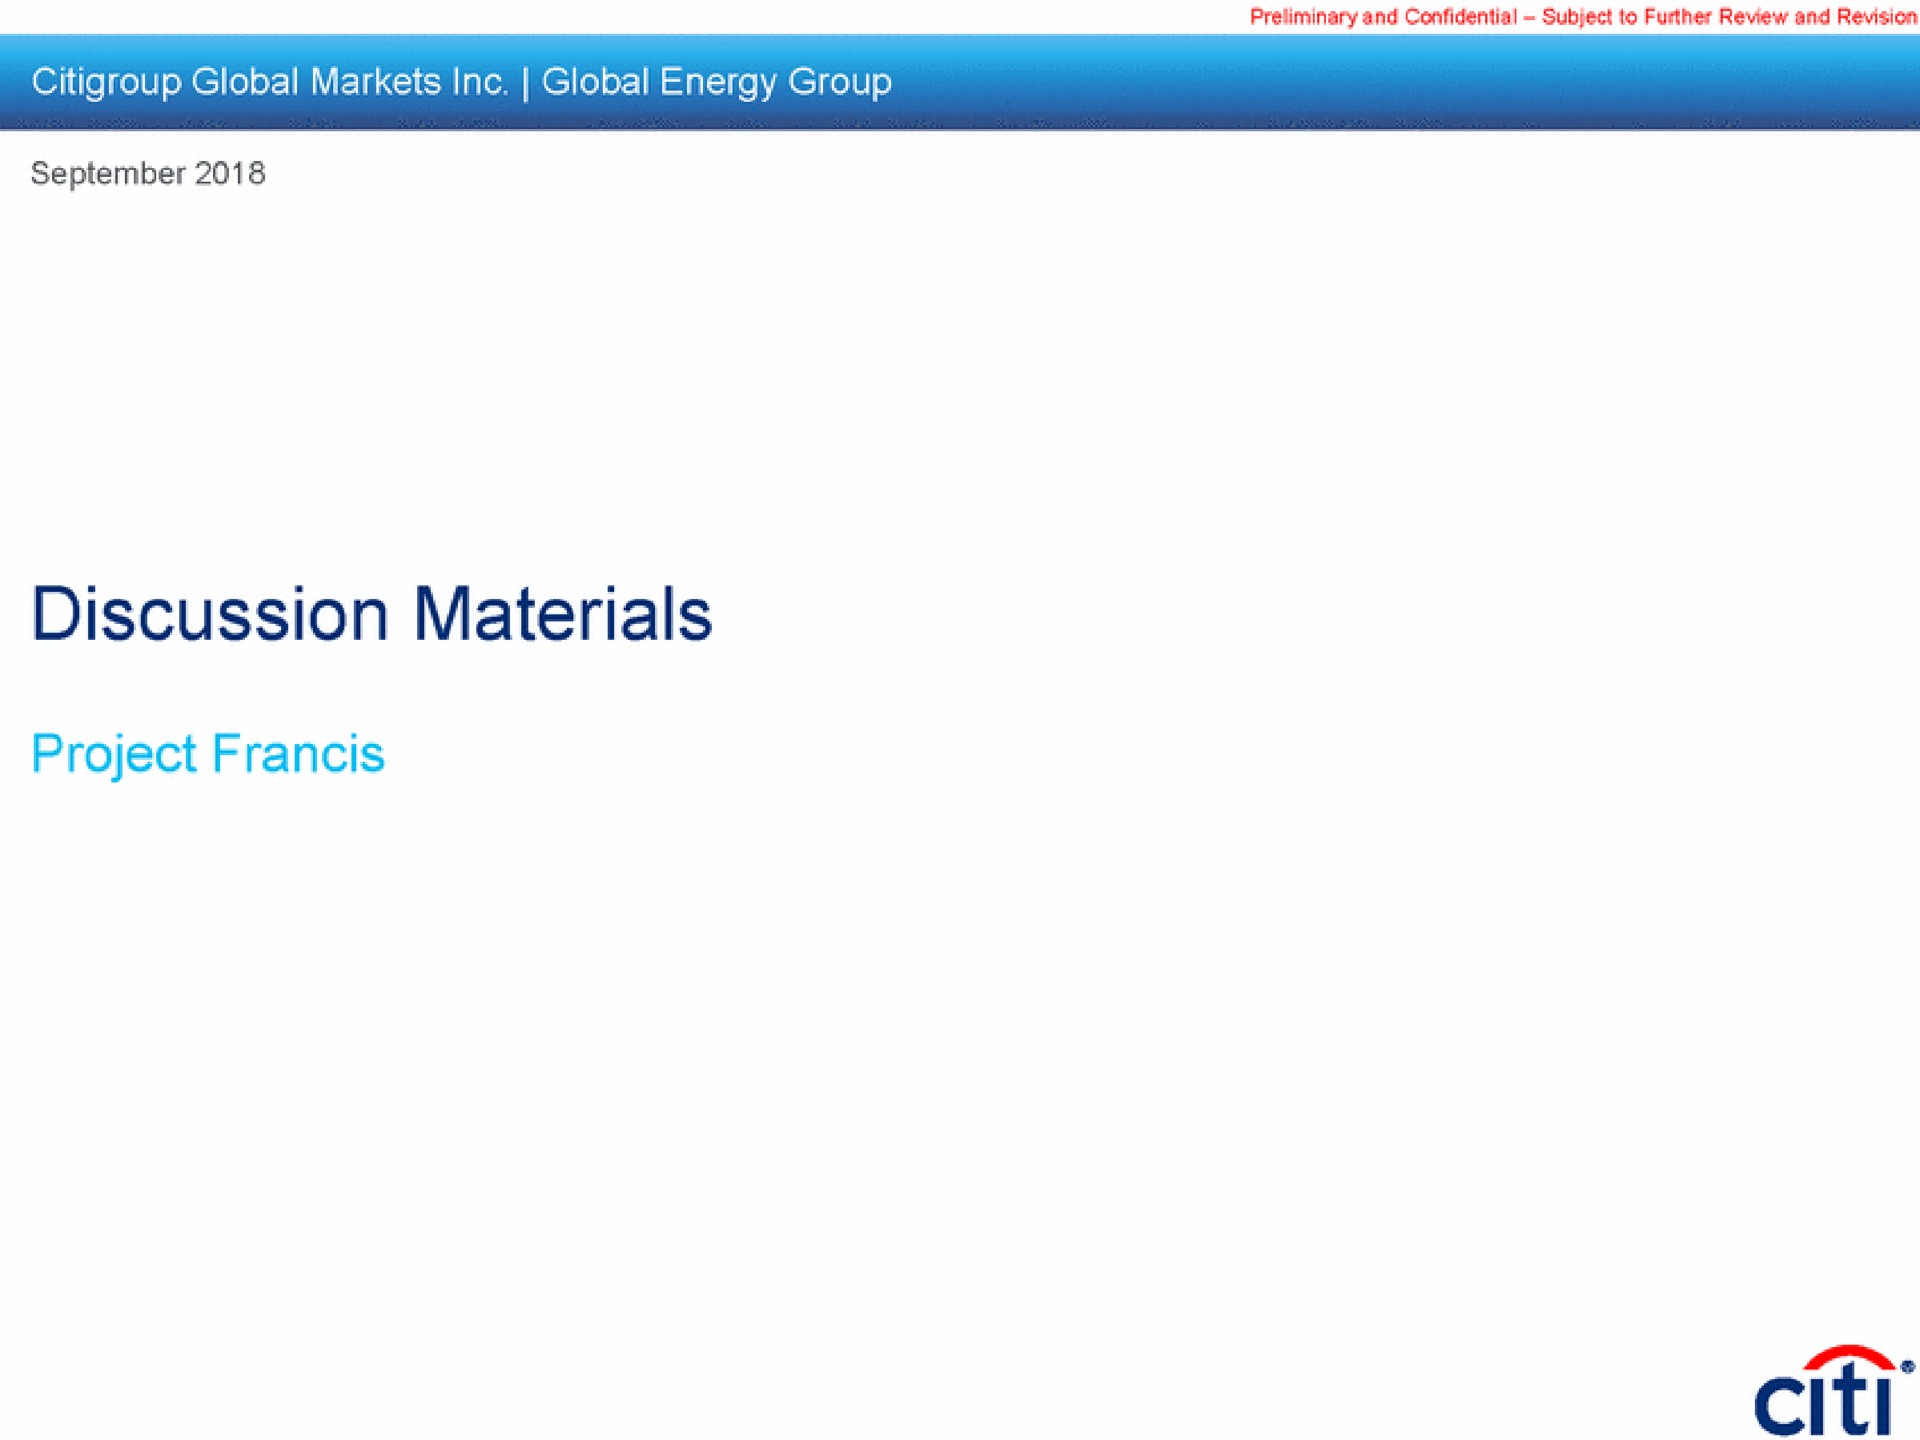 global markets global energy group discussion materials project | Citi